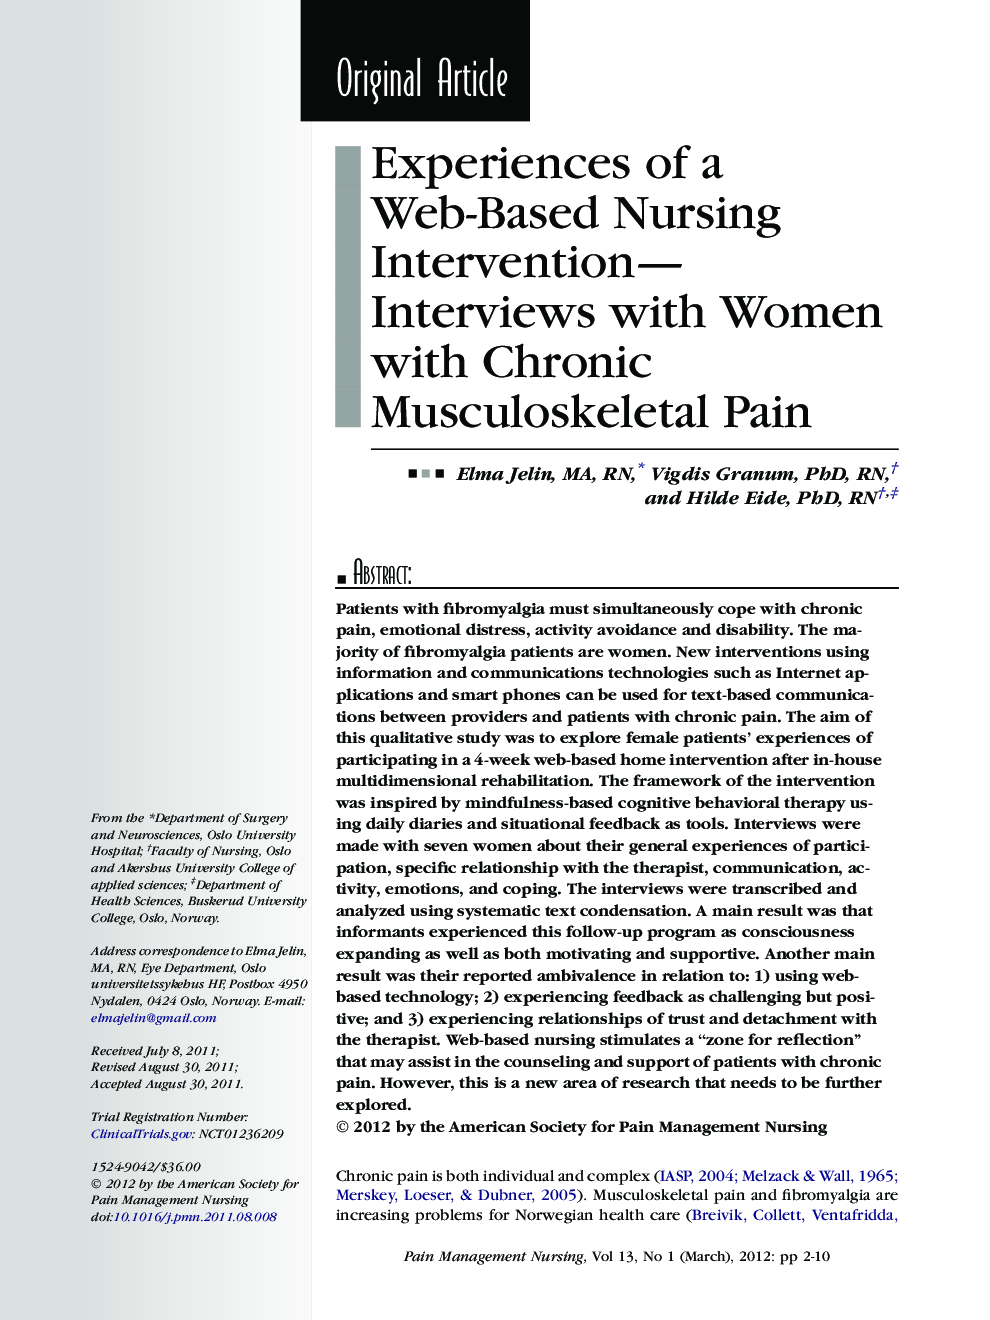 Experiences of a Web-Based Nursing Intervention—Interviews with Women with Chronic Musculoskeletal Pain 